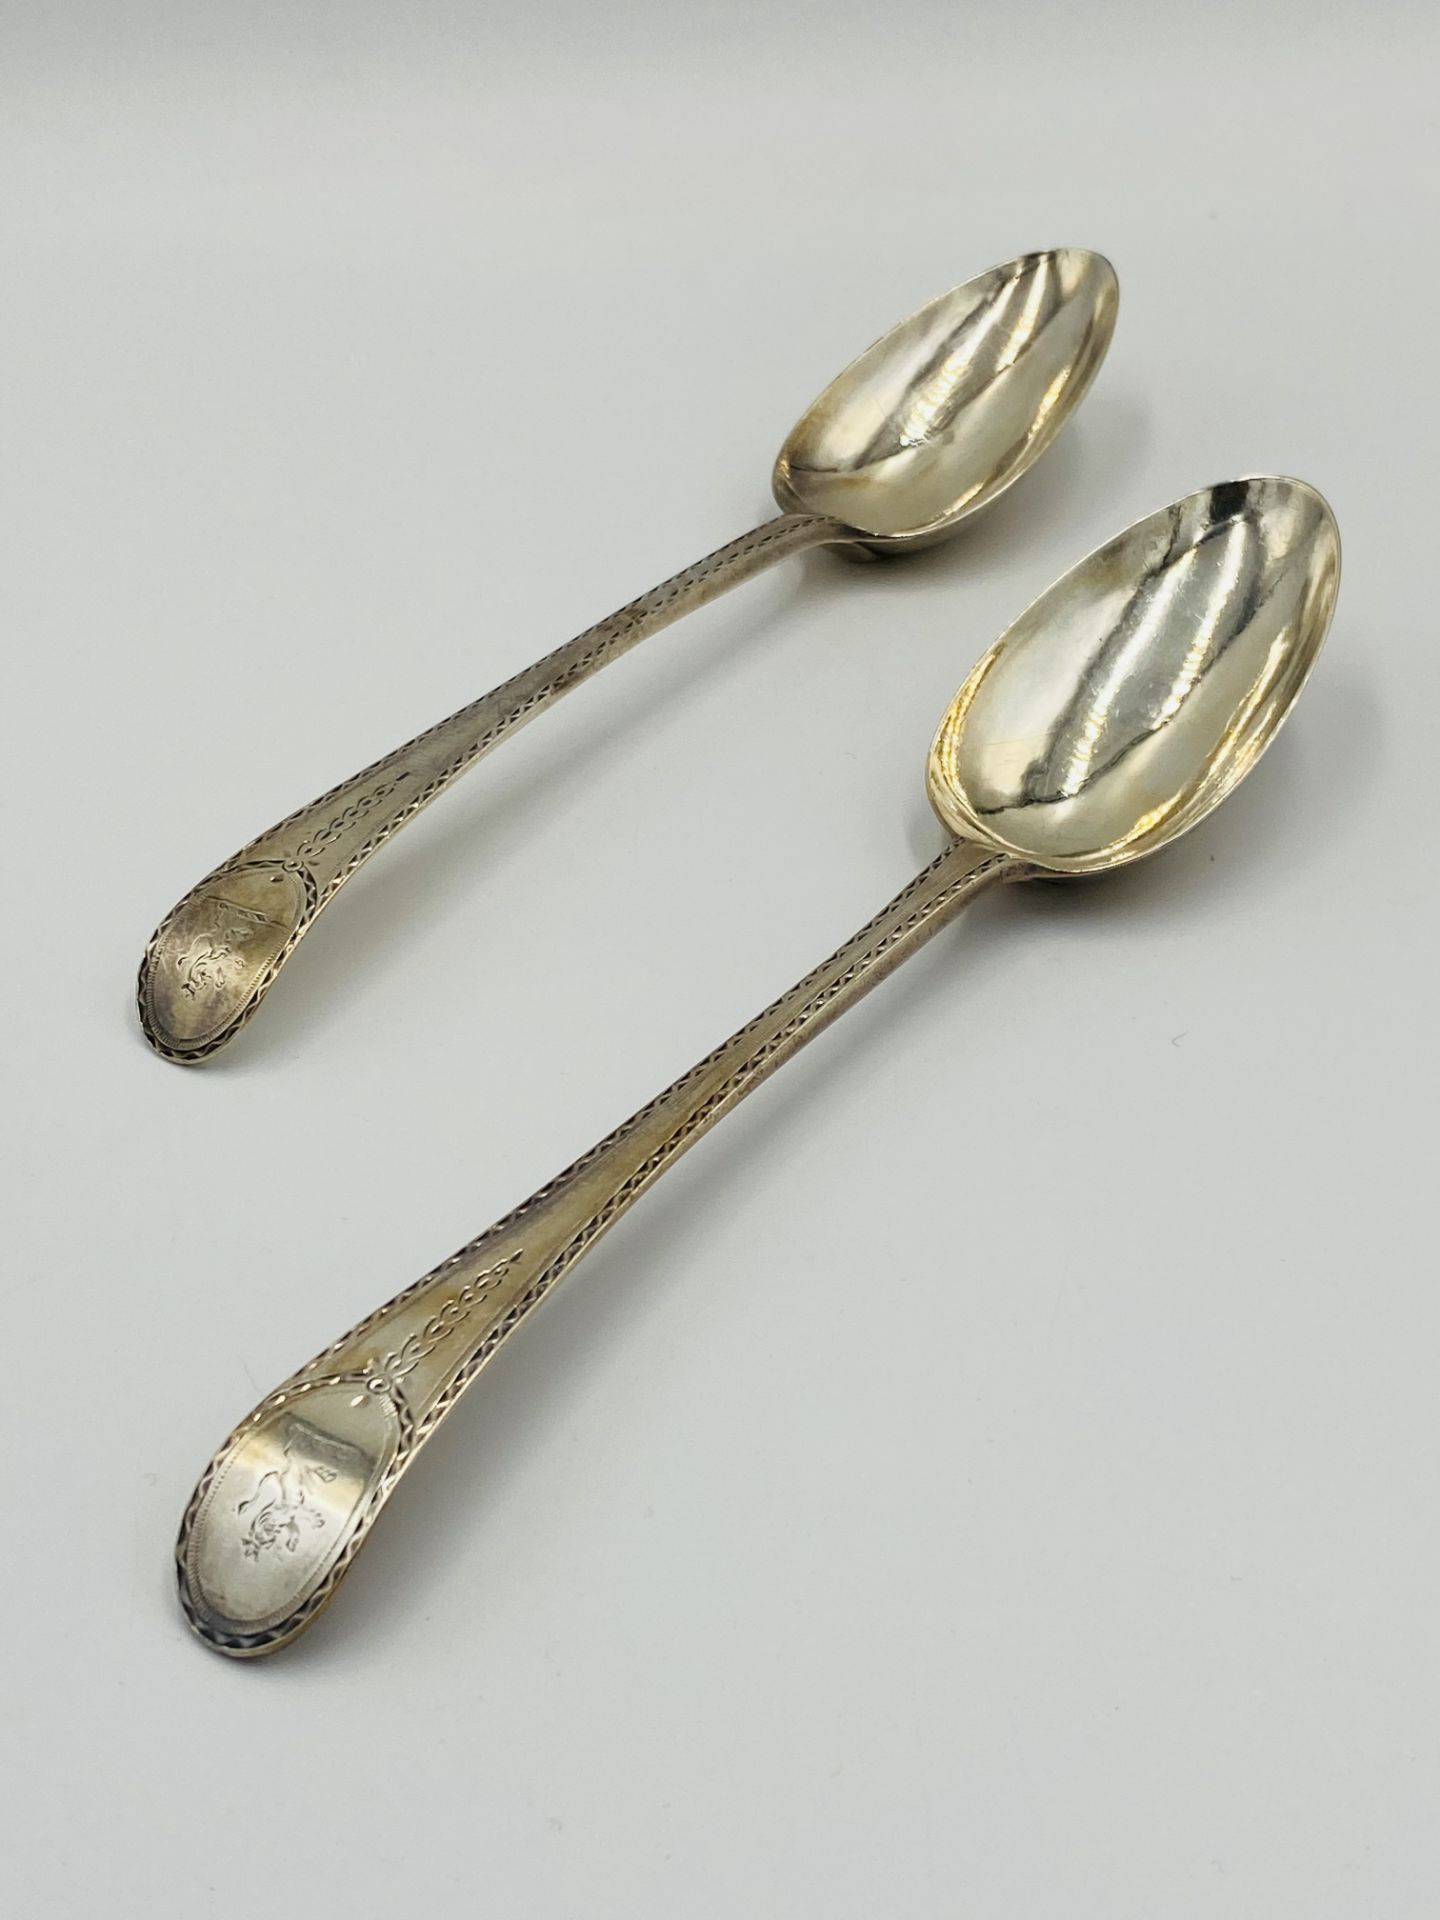 A pair of mid 18th century silver Old English pattern table spoons by Hester Bateman